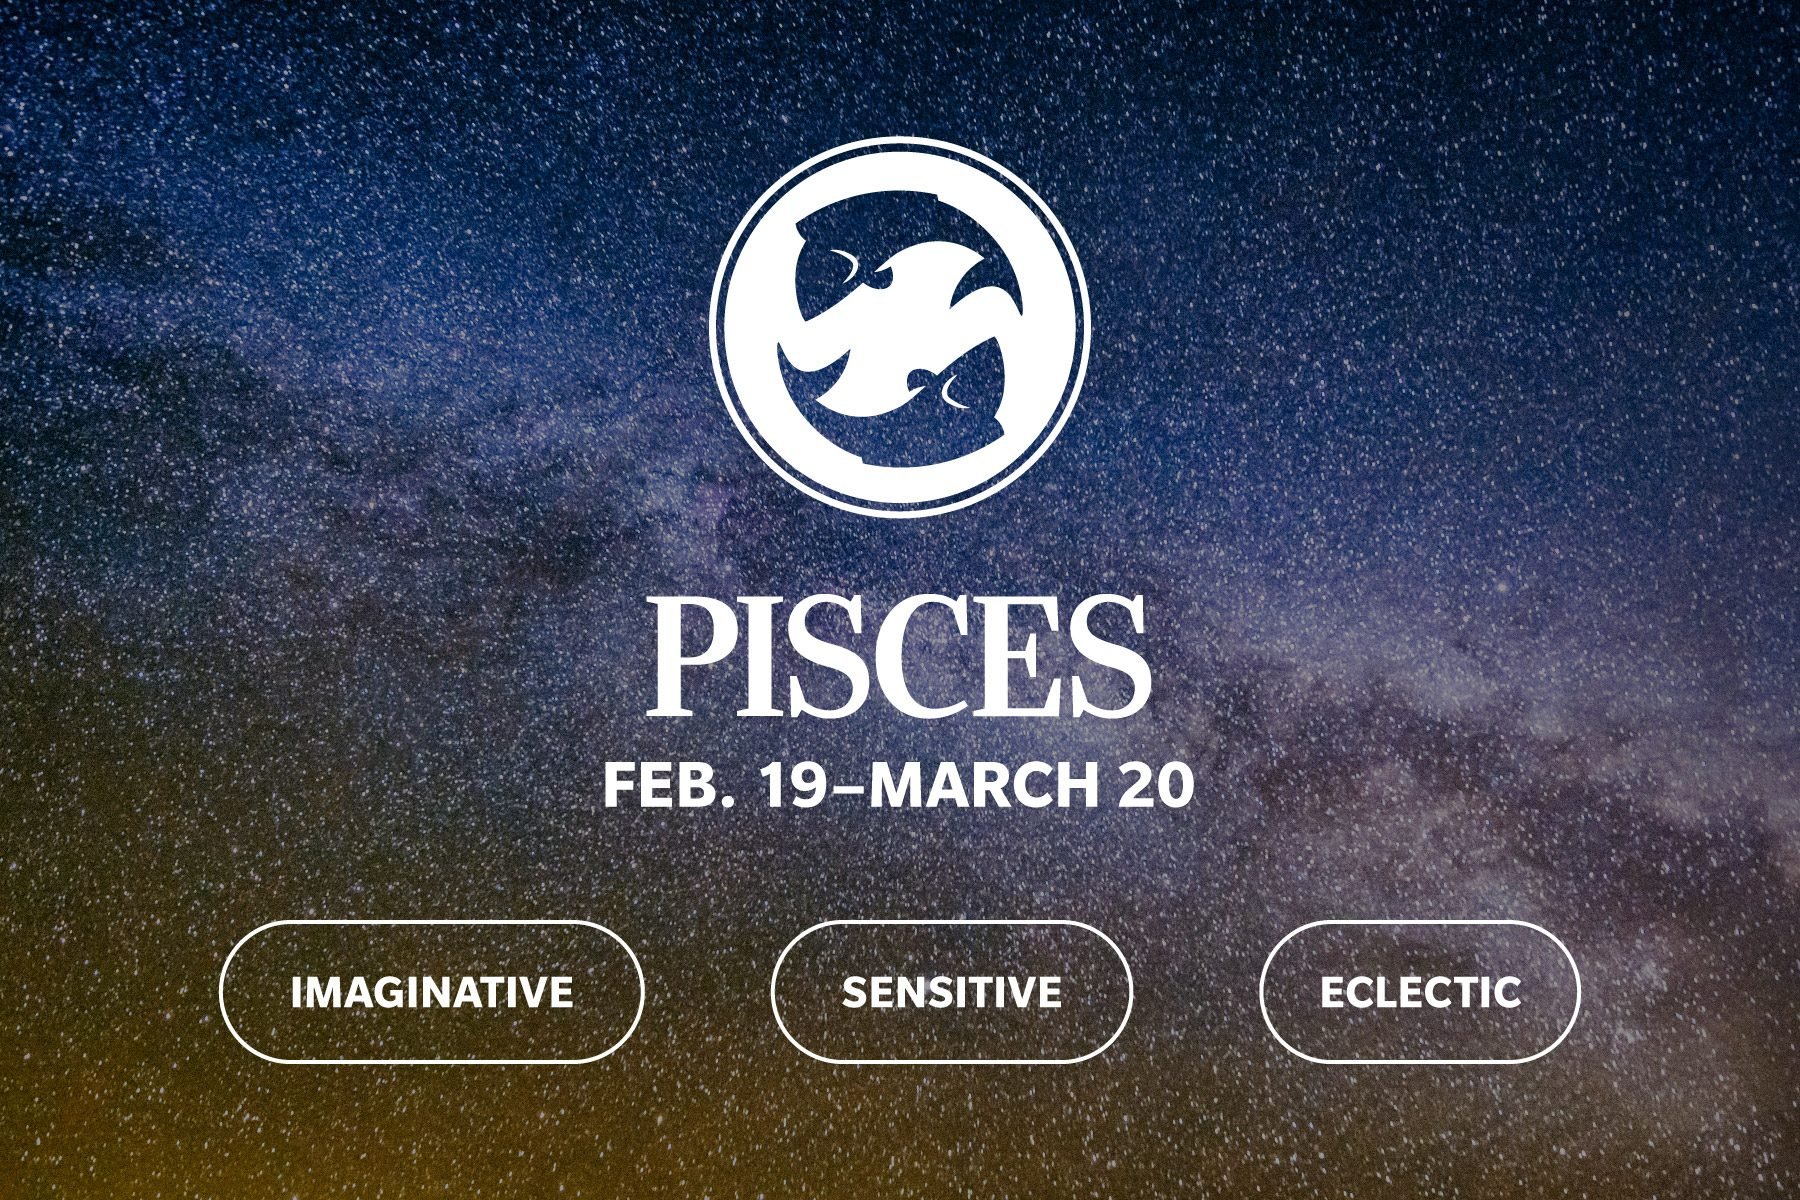 Zodiac sign qualities on galaxy background pisces